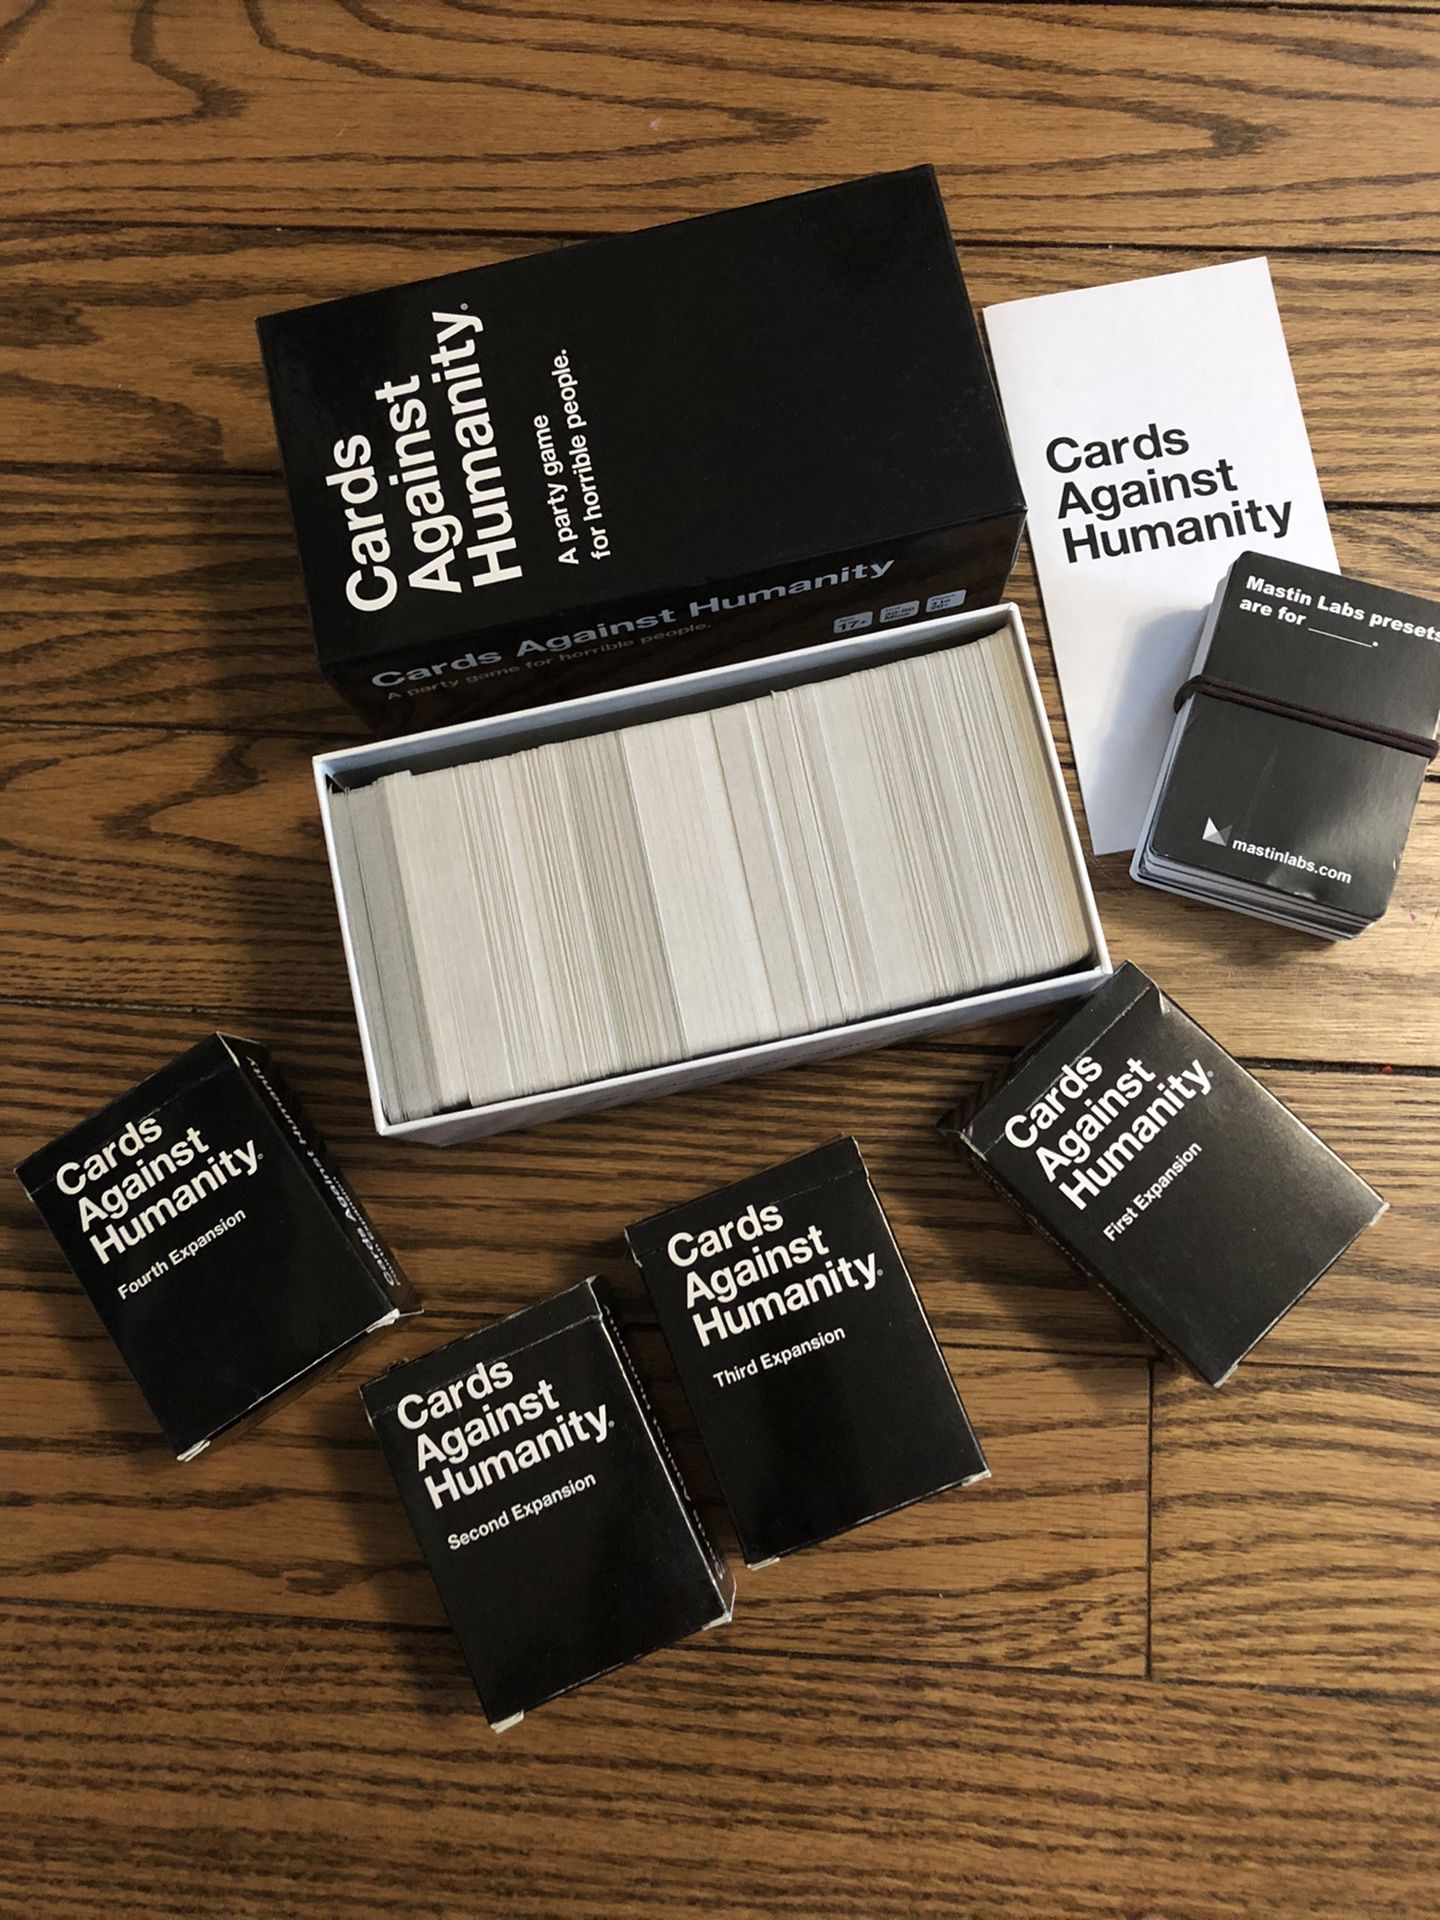 Cards Against Humanity with 4 Expansions